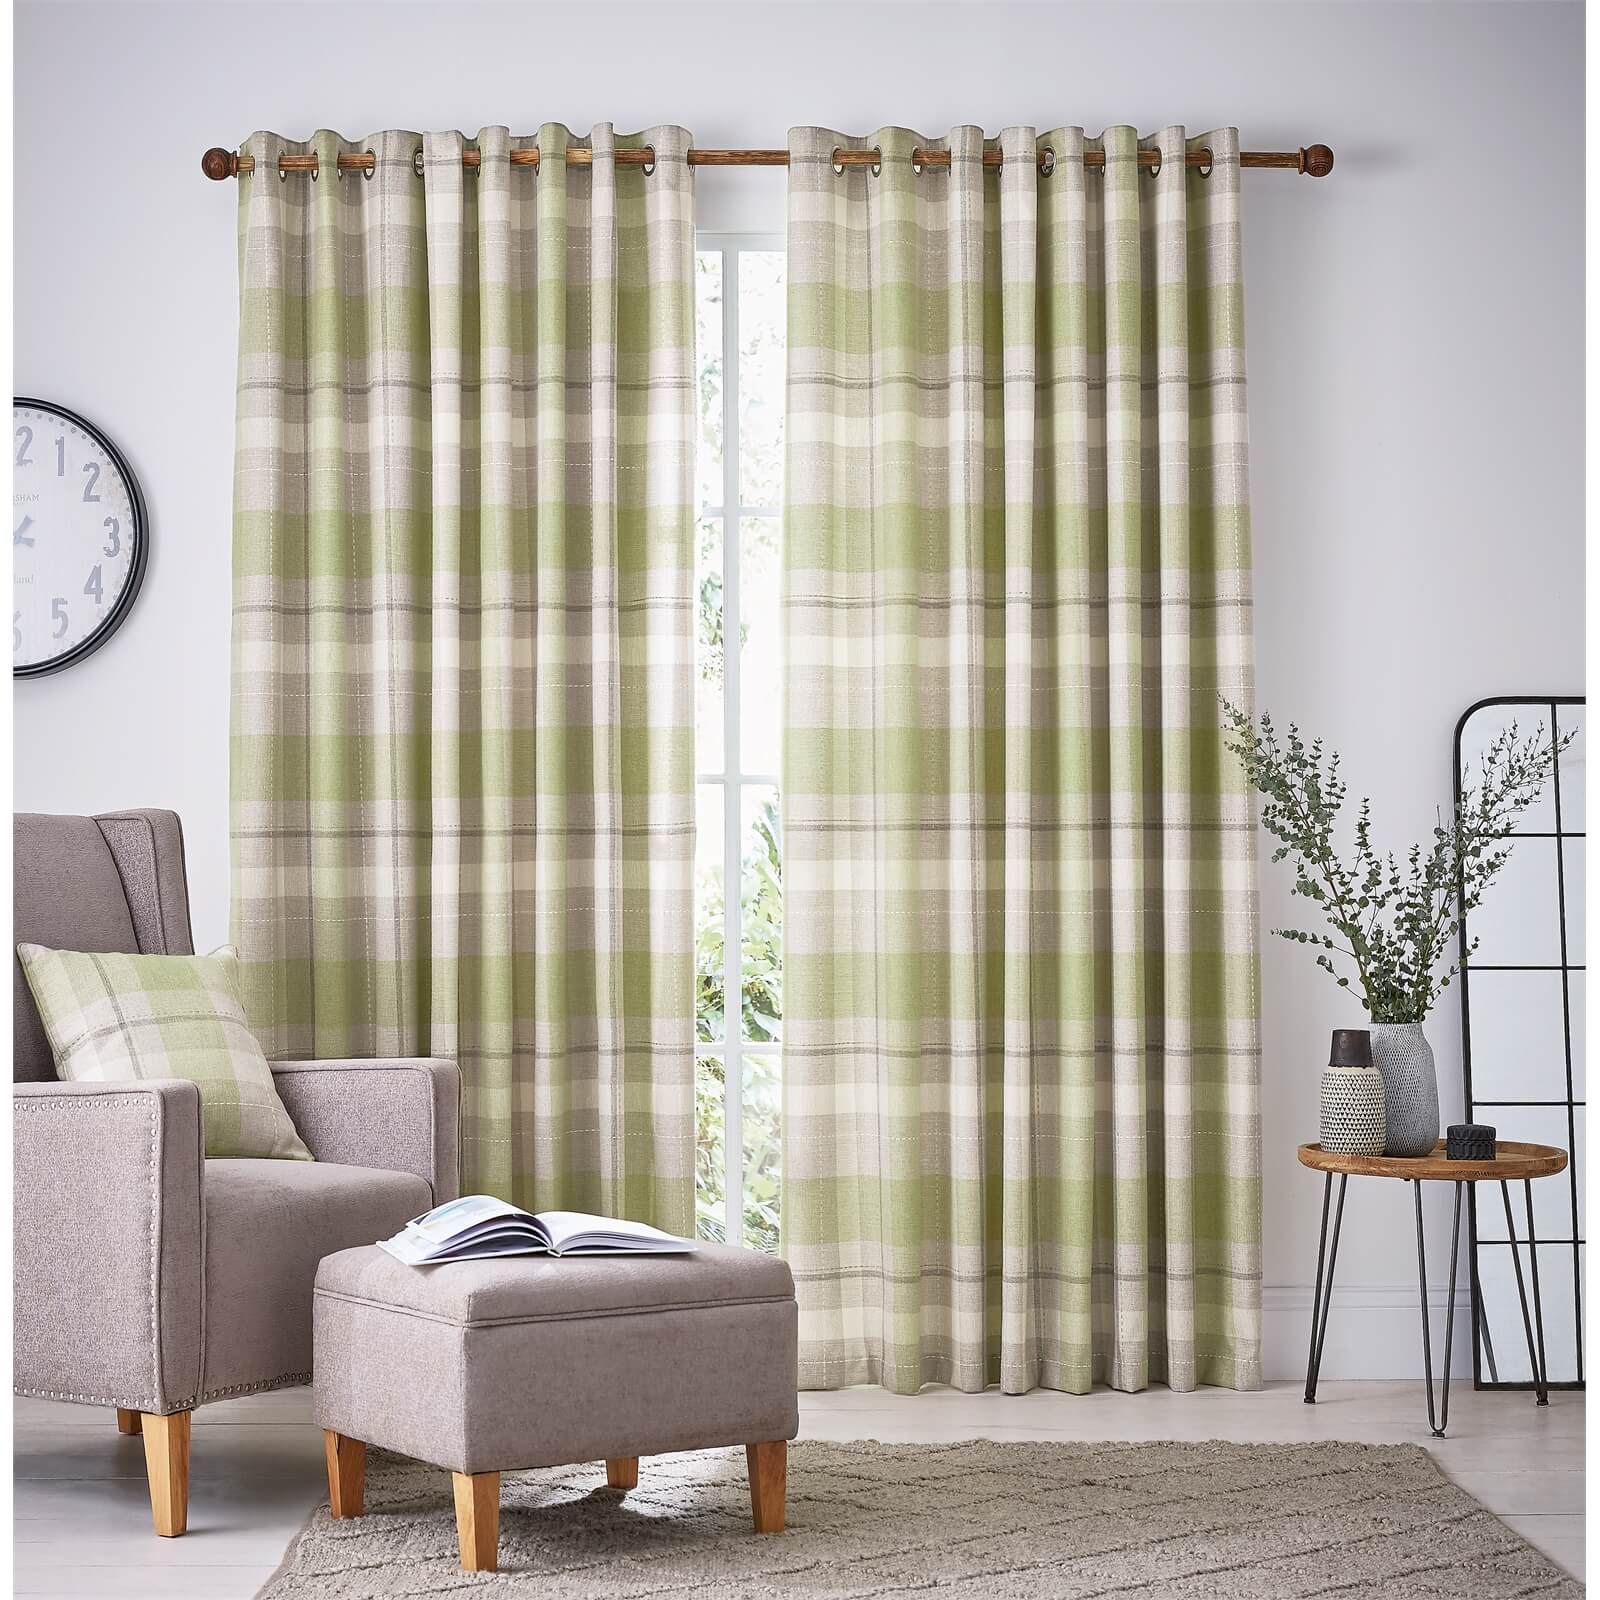 Helena Springfield Nora Lined Curtains 66 x 90 - Willow